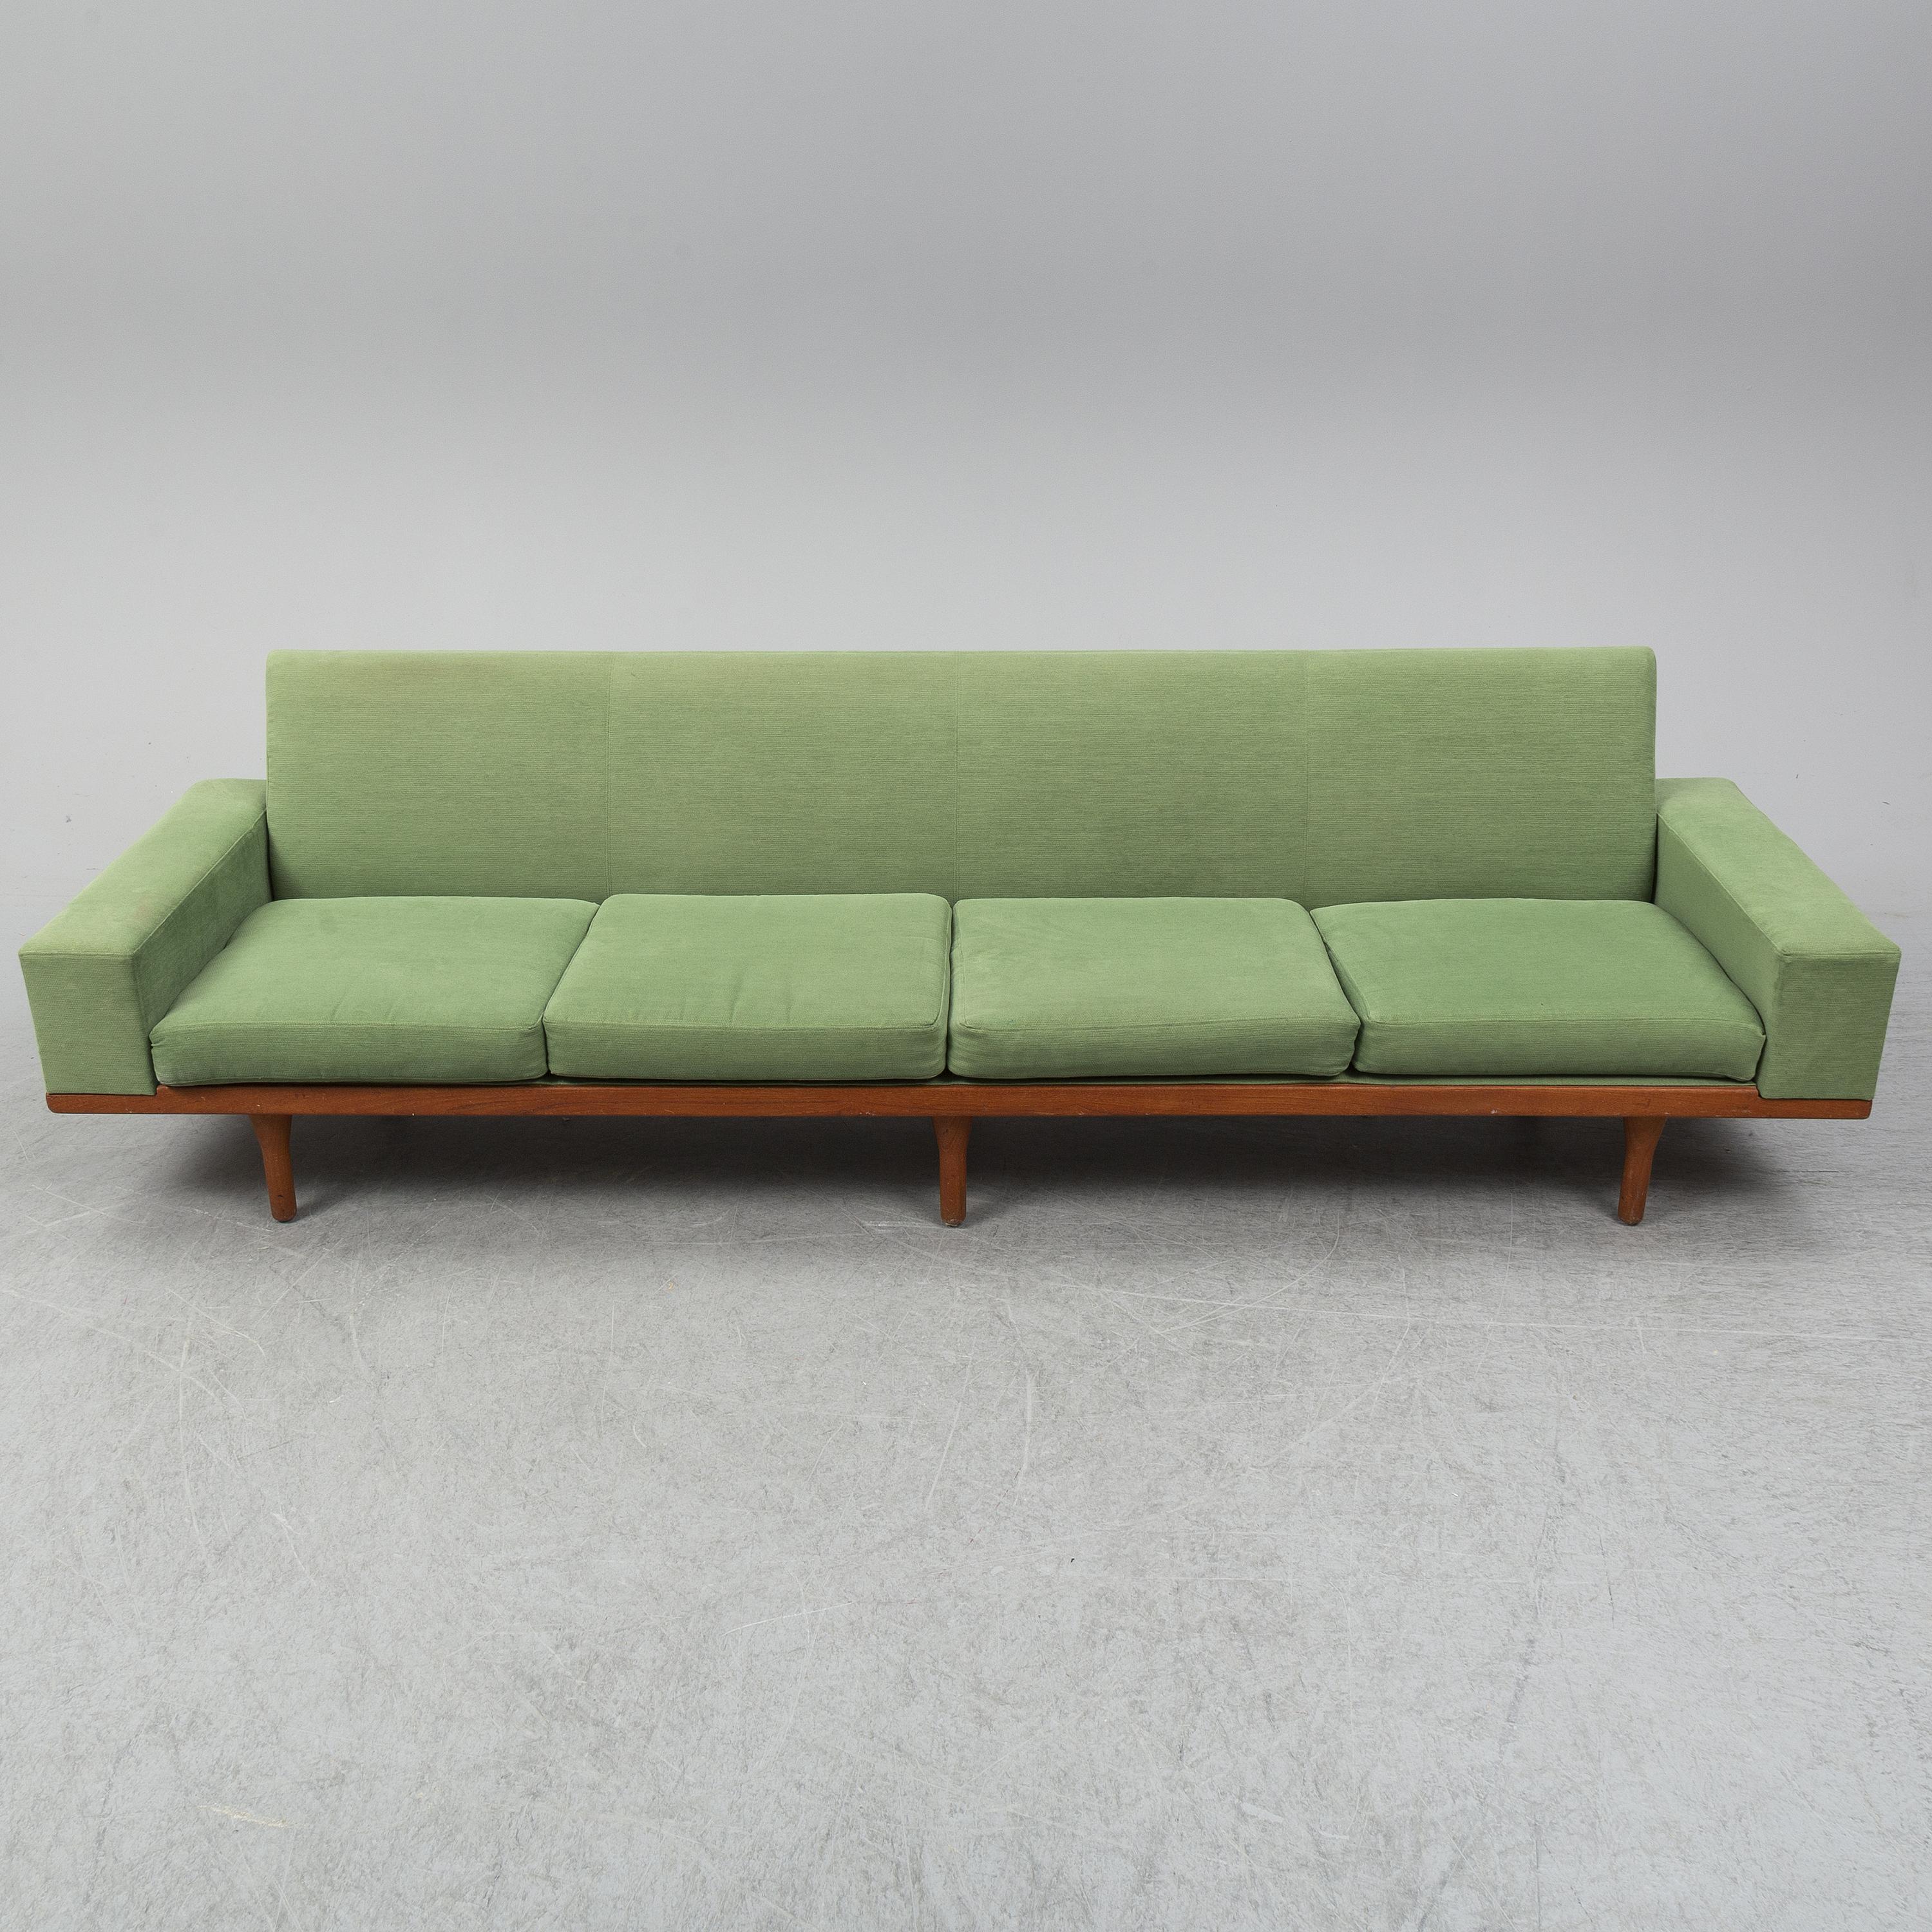 The low lines typical of Danish design make The Australia a perfect piece of furniture. A subtle internal spring back and firm cushions create a comfortable seating experience.  Much of Wikkelso's work was inspired by nature, perhaps the vast open